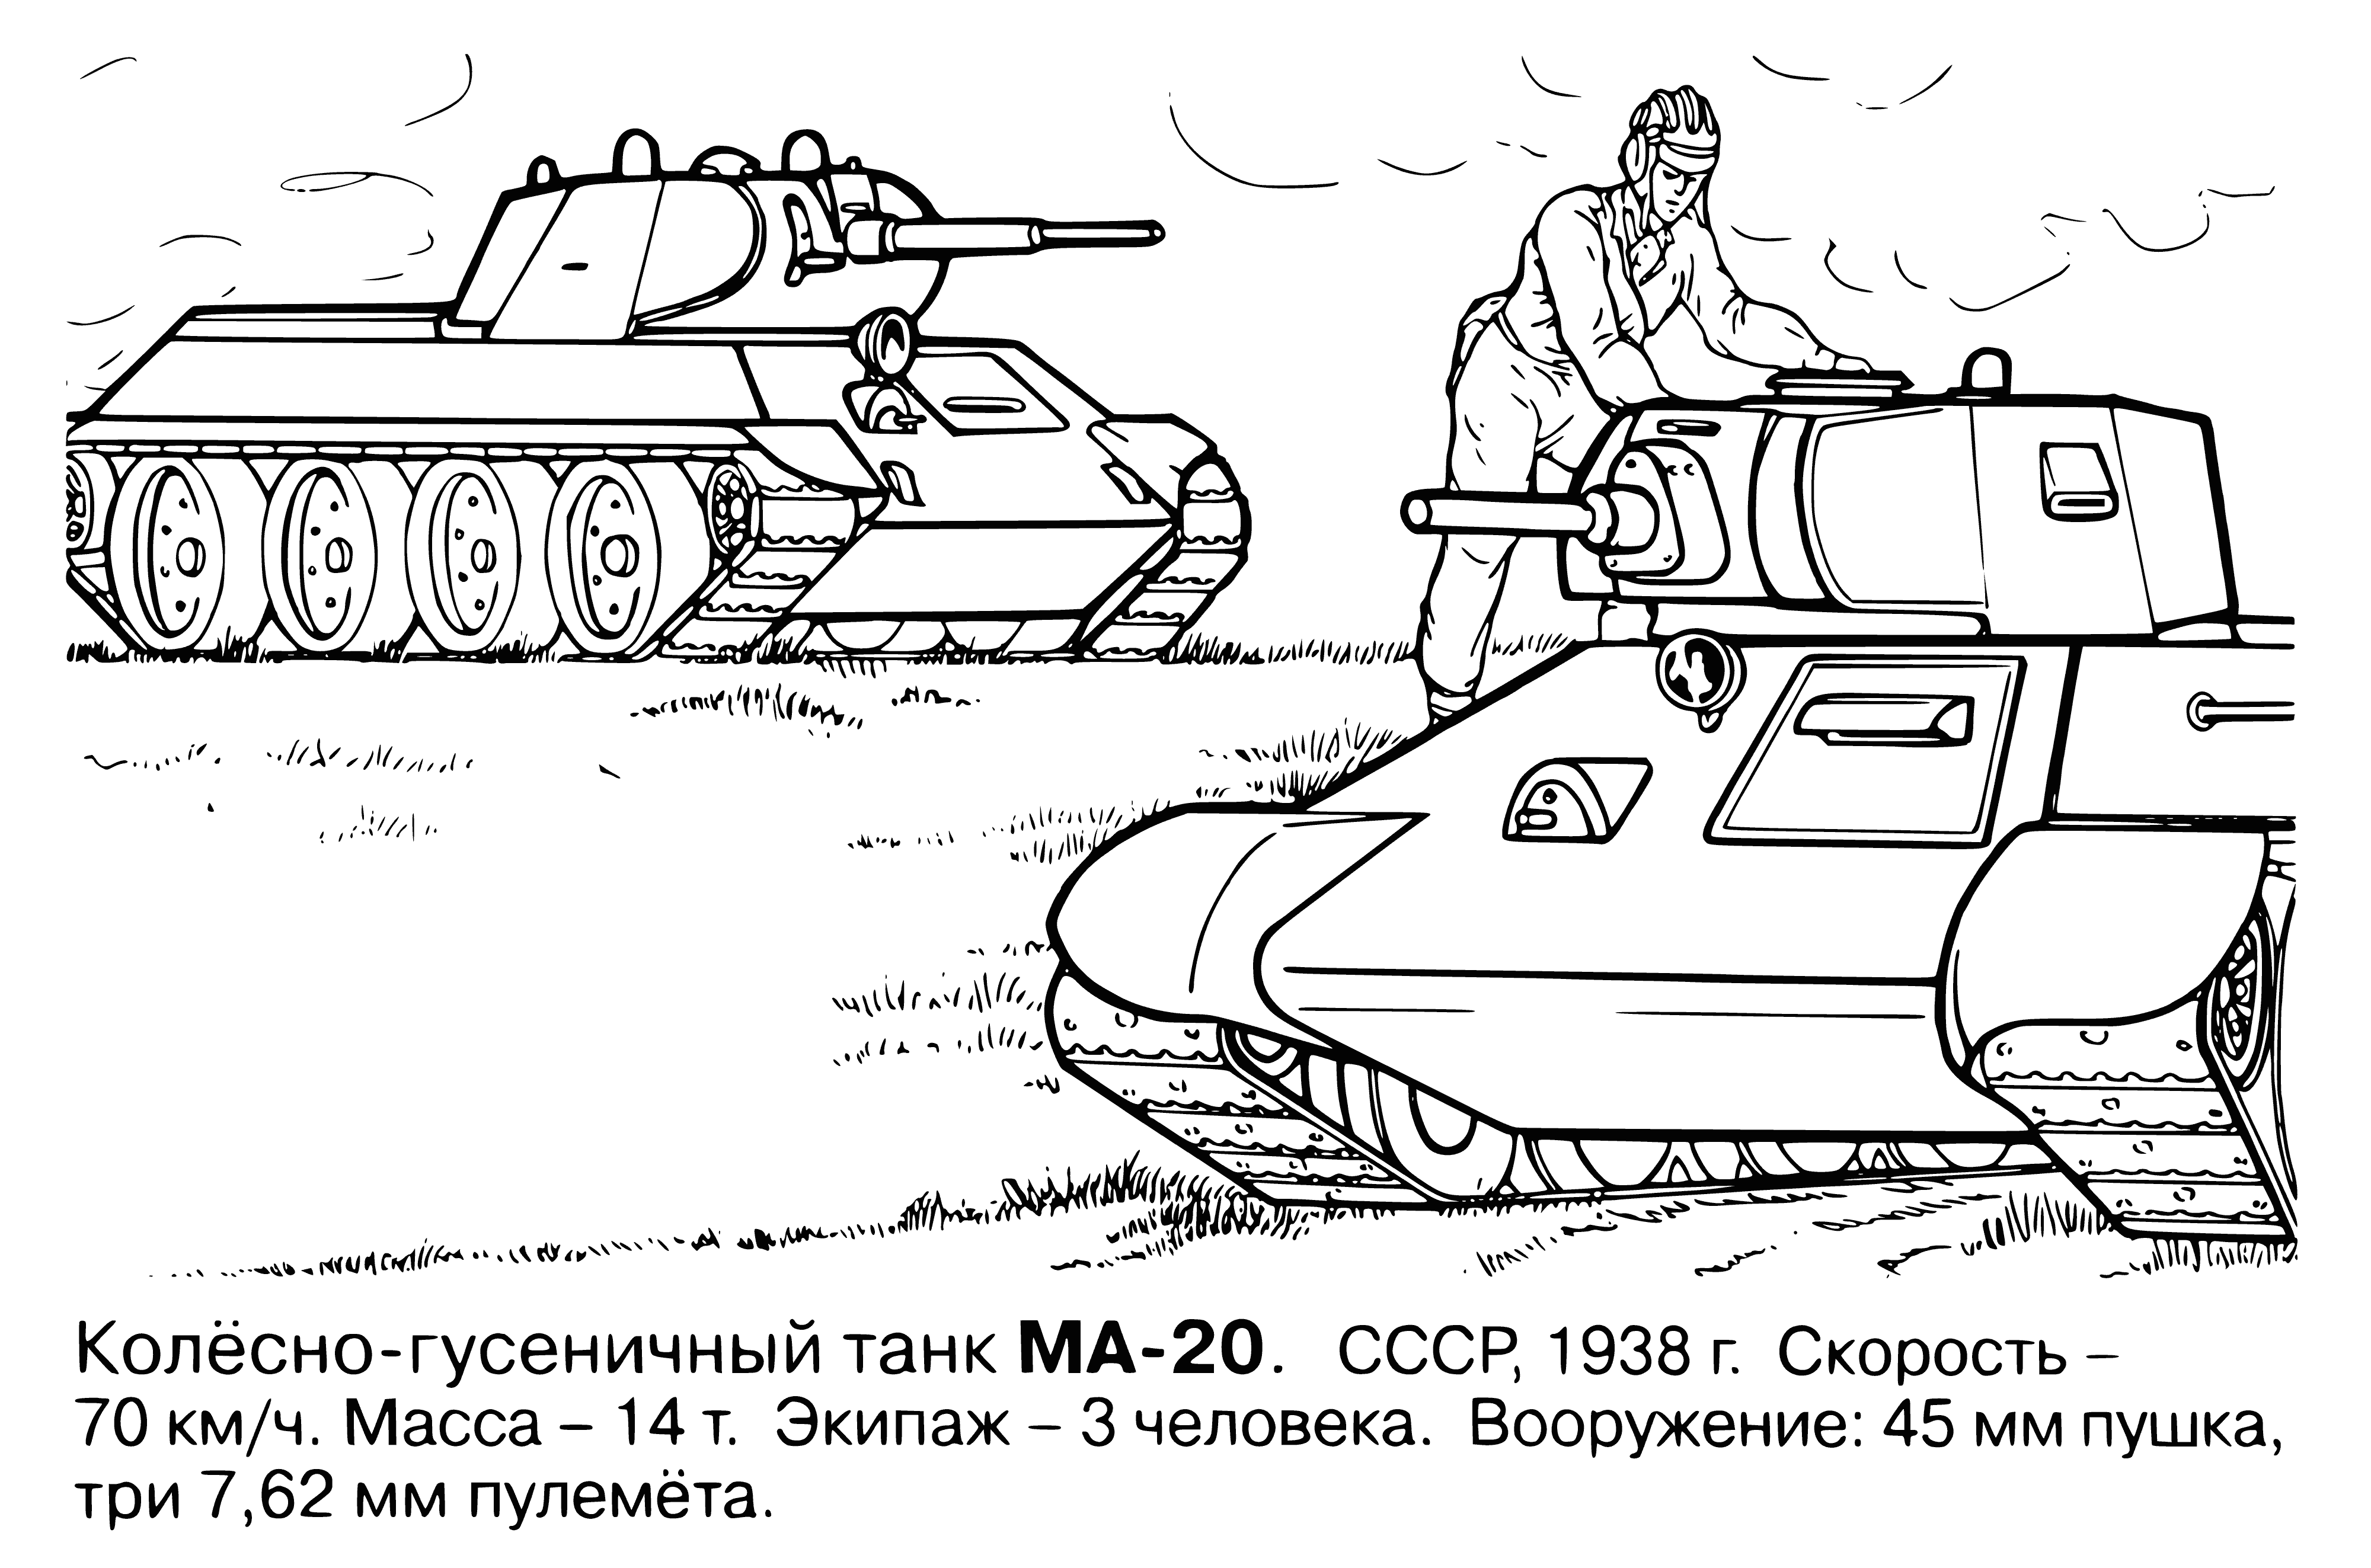 Wheeled-tracked tank coloring page